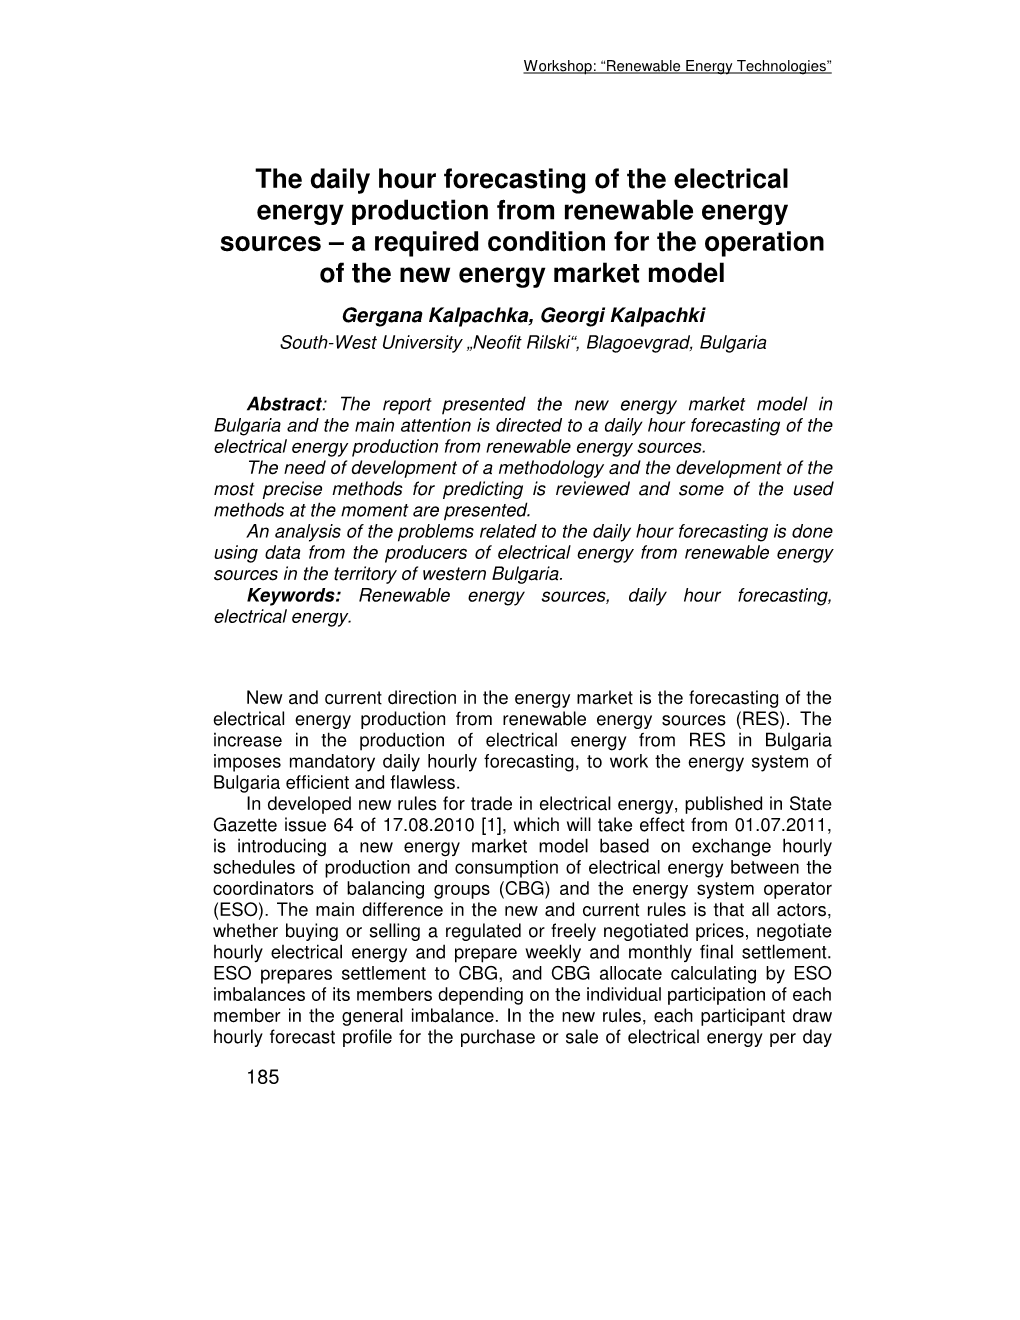 The Daily Hour Forecasting of the Electrical Energy Production From